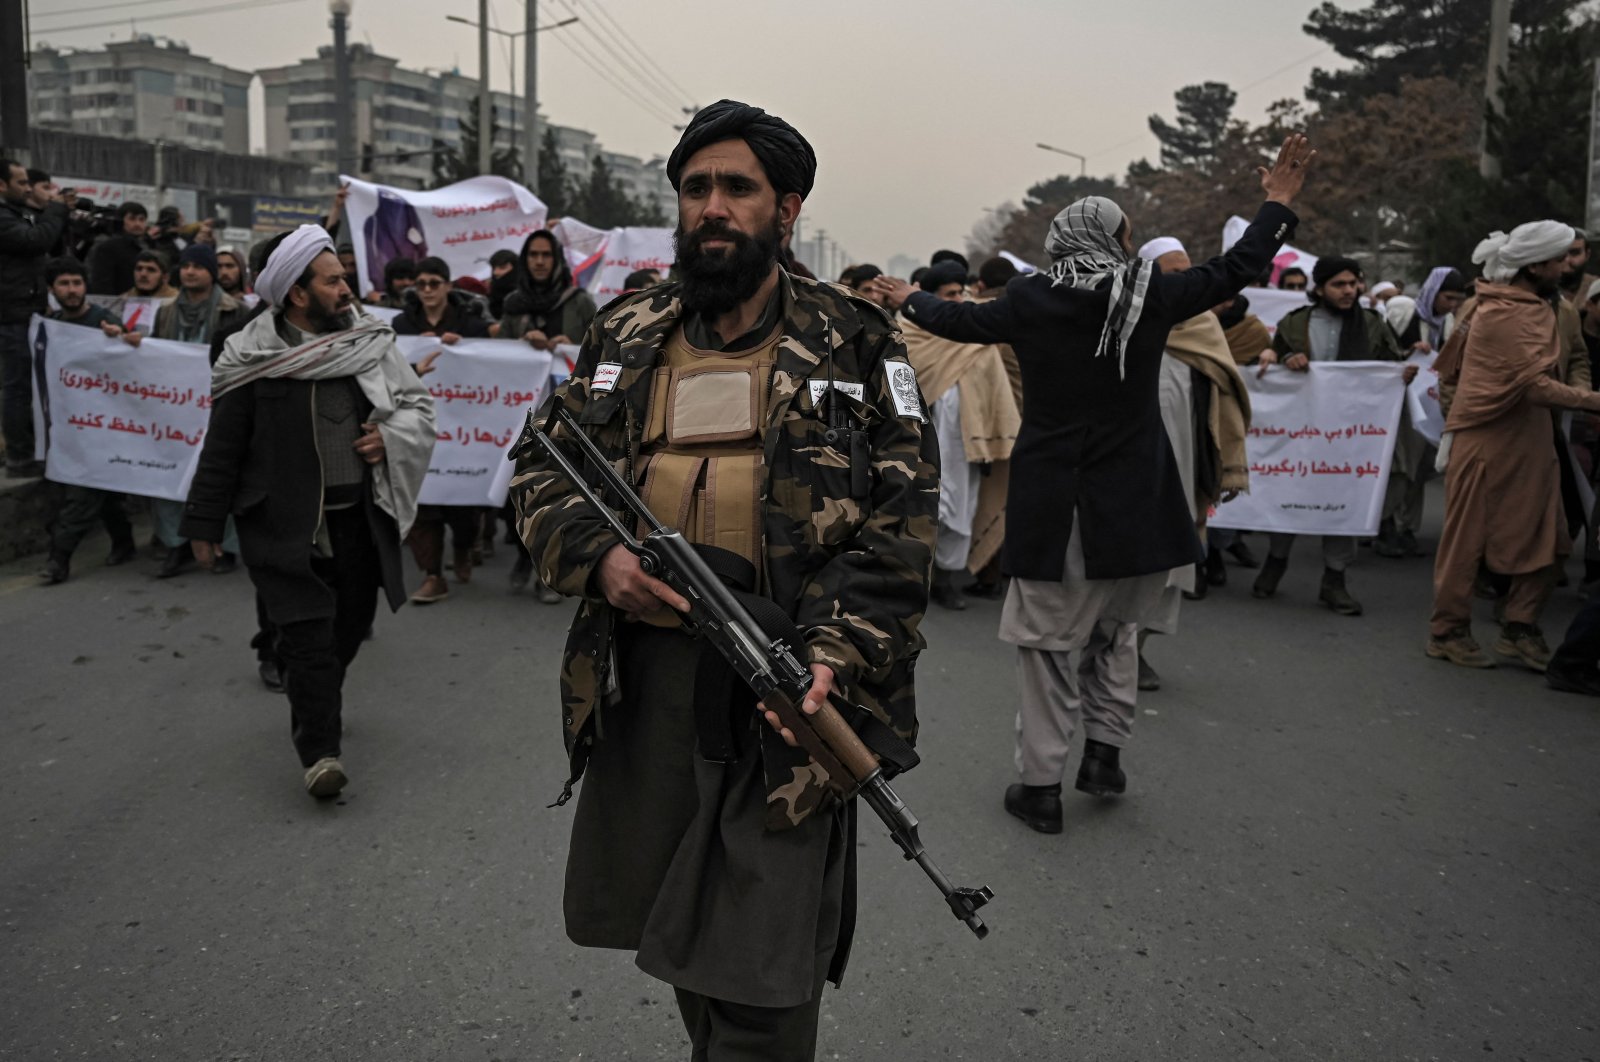 A Taliban fighter escorts people during a demonstration to condemn the recent protest by the Afghan women&#039;s rights activists, in Kabul, Afghanistan, Jan. 21, 2022. (AFP Photo)